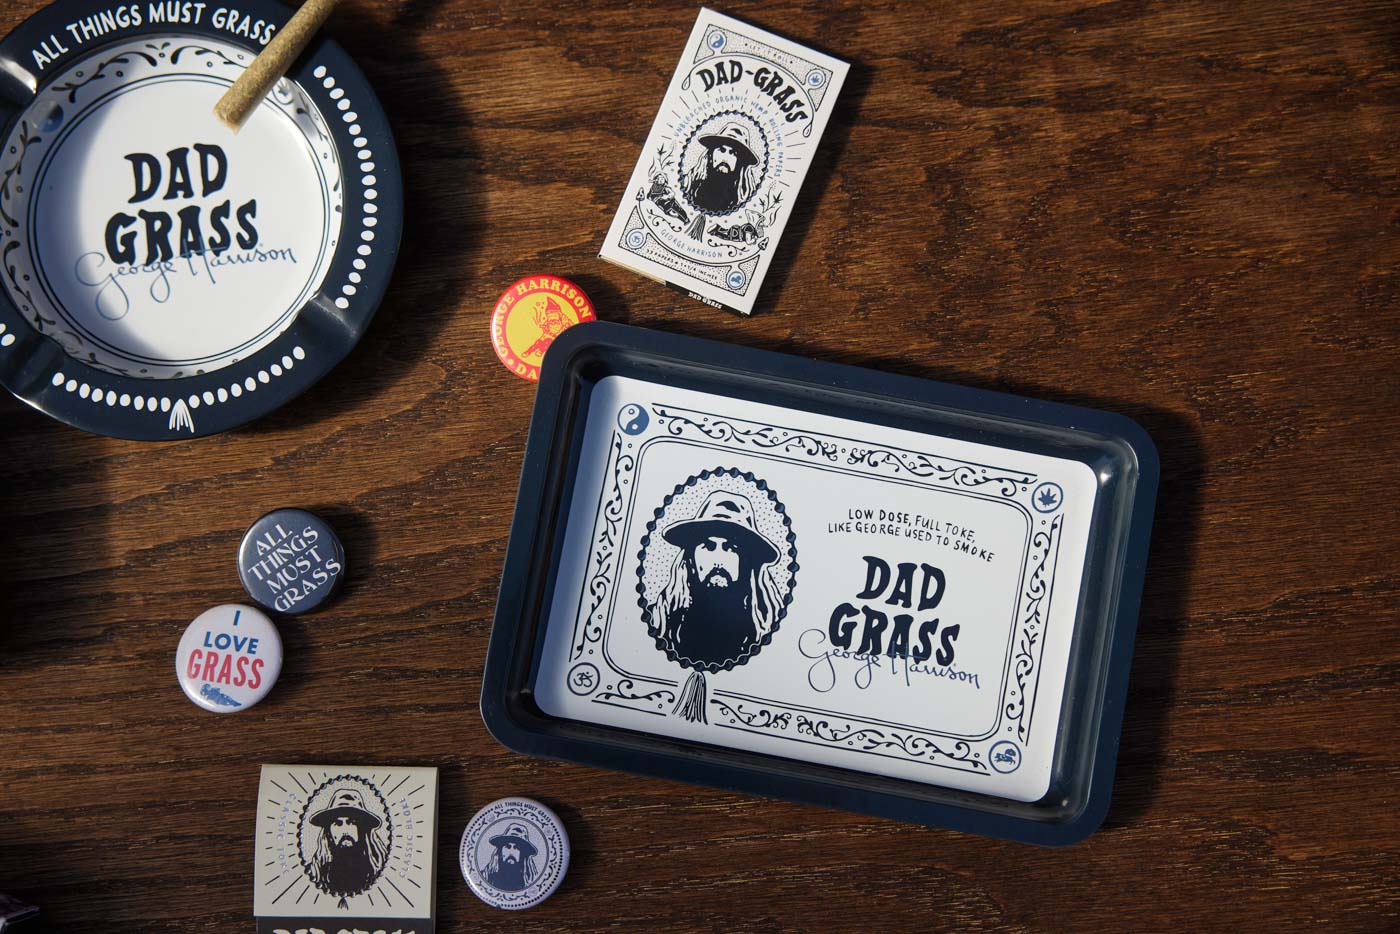 Dad Grass x George Harrison Signature Rolling Tray Best Price